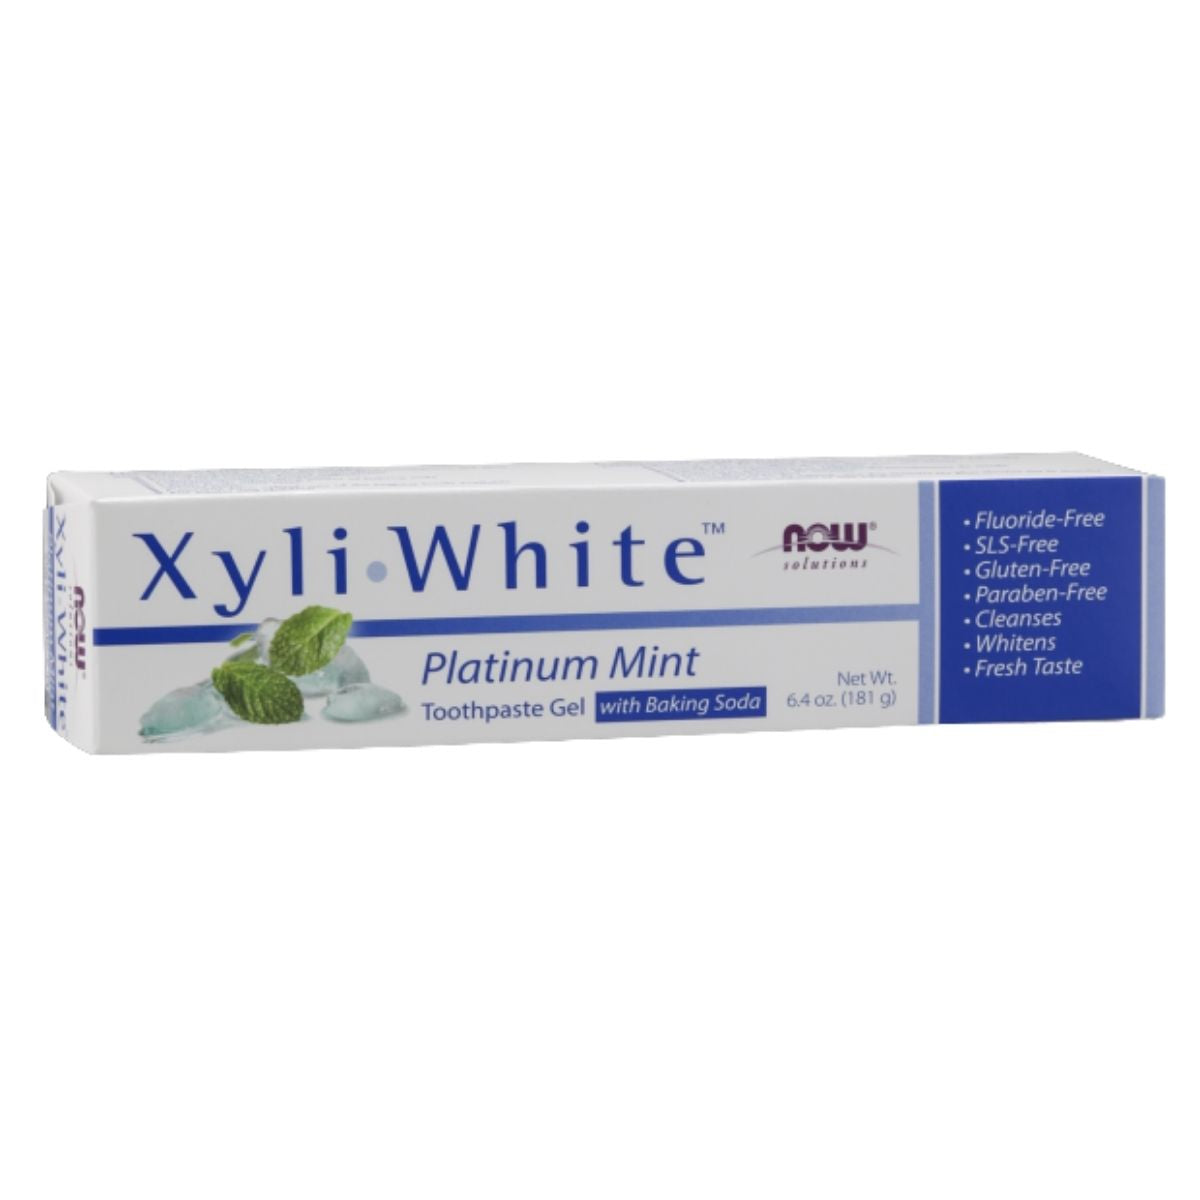 Toothpaste Gel, XyliWhite - Platinum Mint with Baking Soda